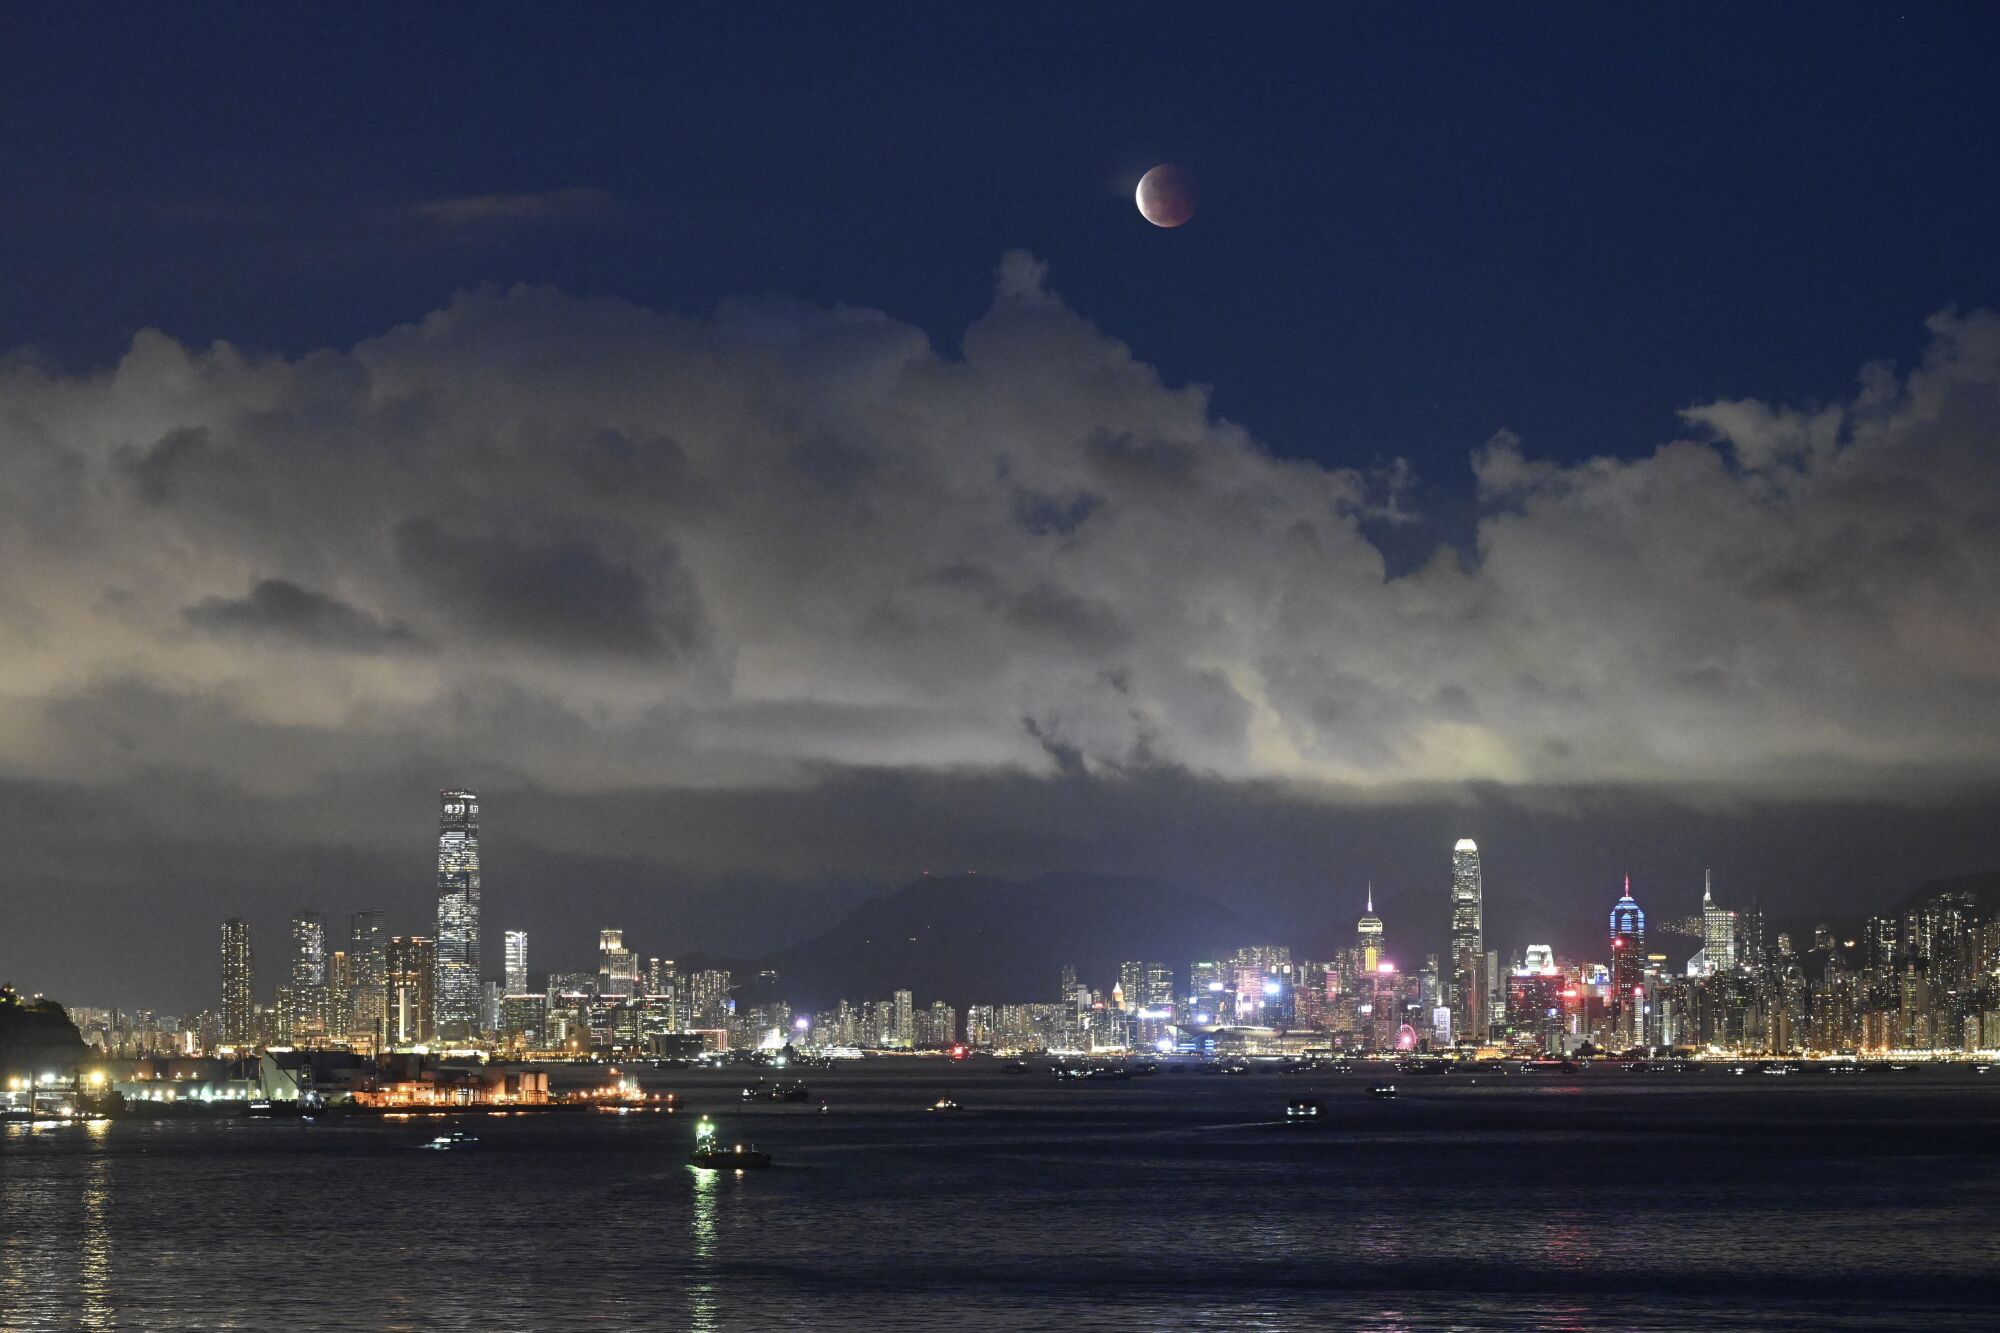 The moon rises over the Victoria Harbor